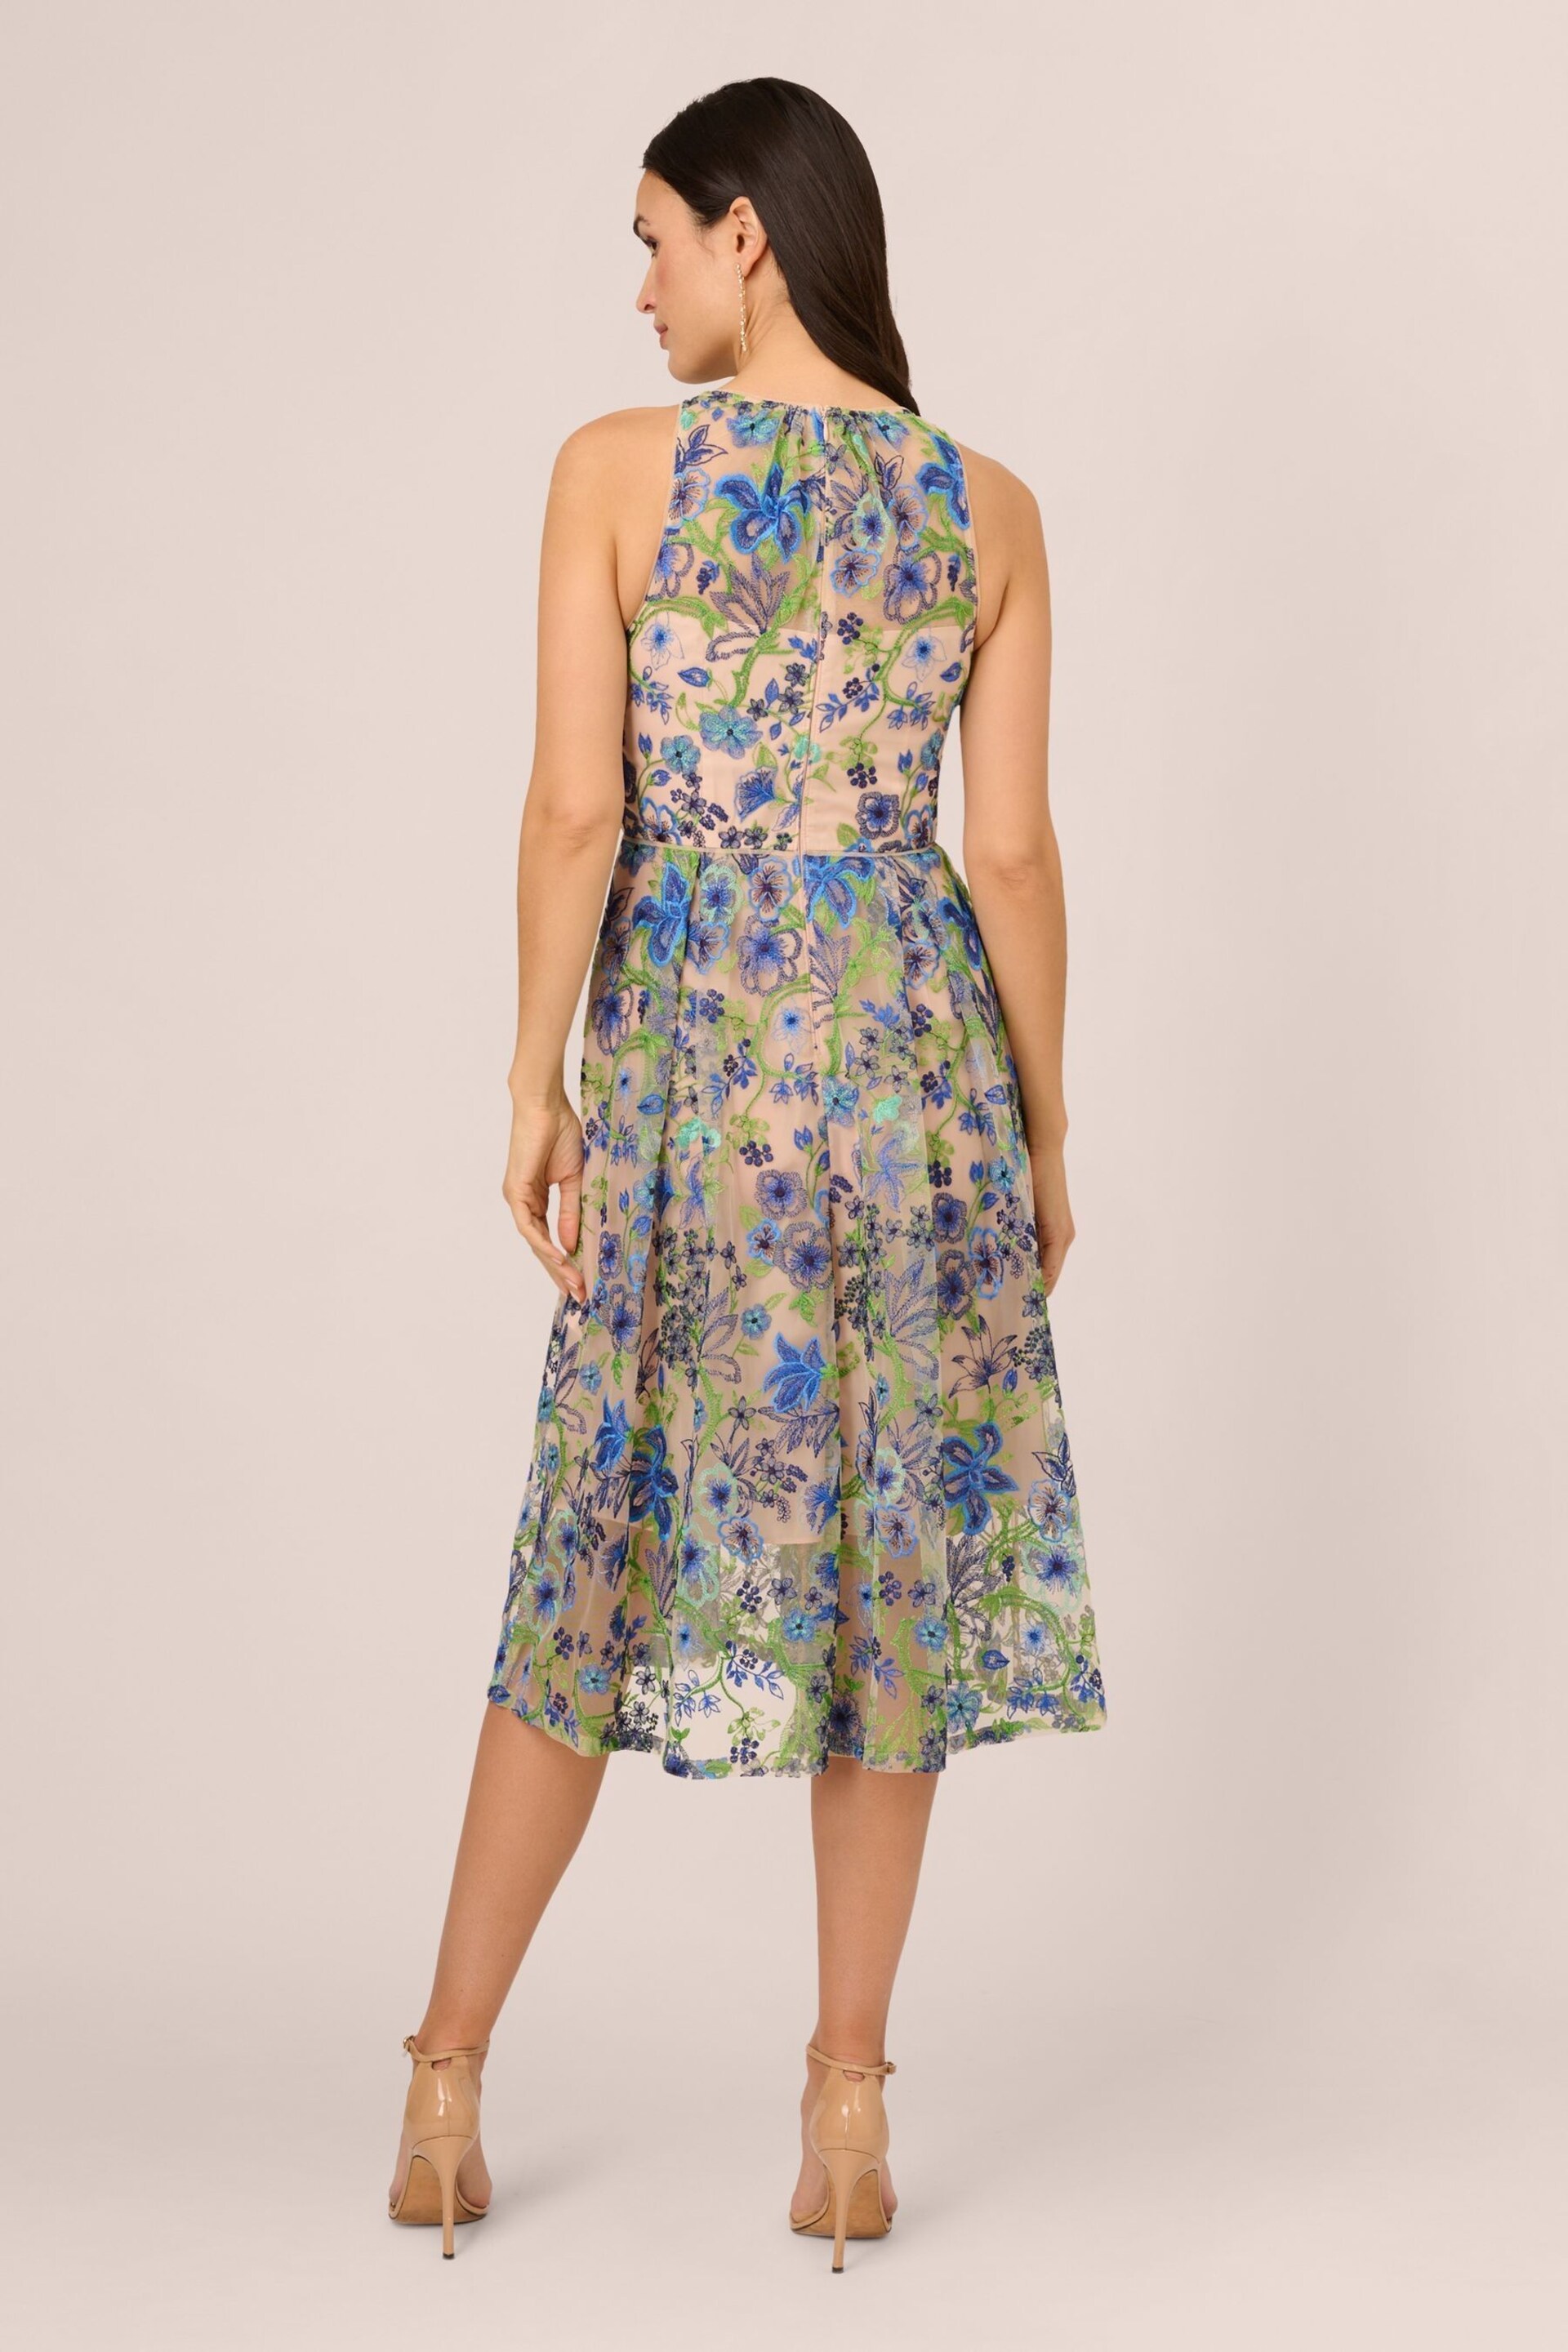 Adrianna Papell Blue Embroidered Fit And Flare Dress - Image 2 of 7